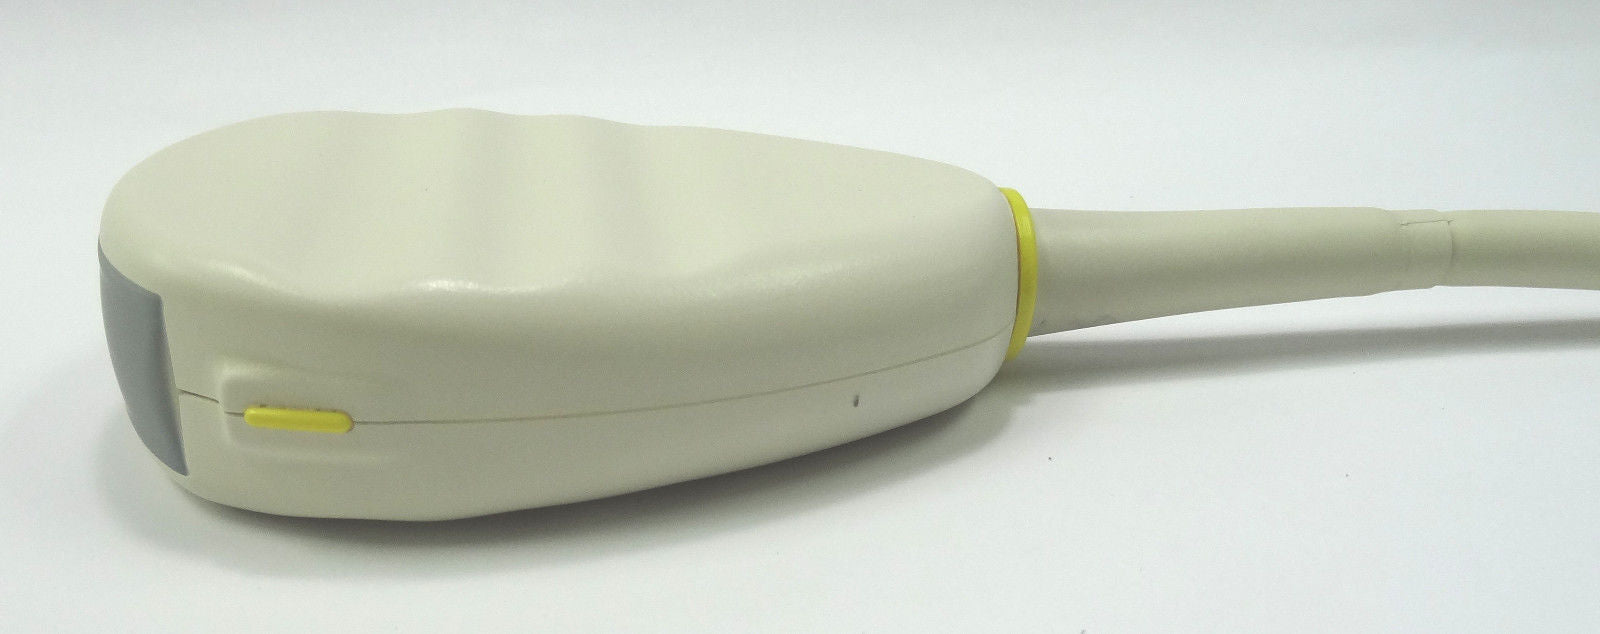 PHILIPS ATL C5-2 Curved Array Ultrasound Transducer Probe DIAGNOSTIC ULTRASOUND MACHINES FOR SALE